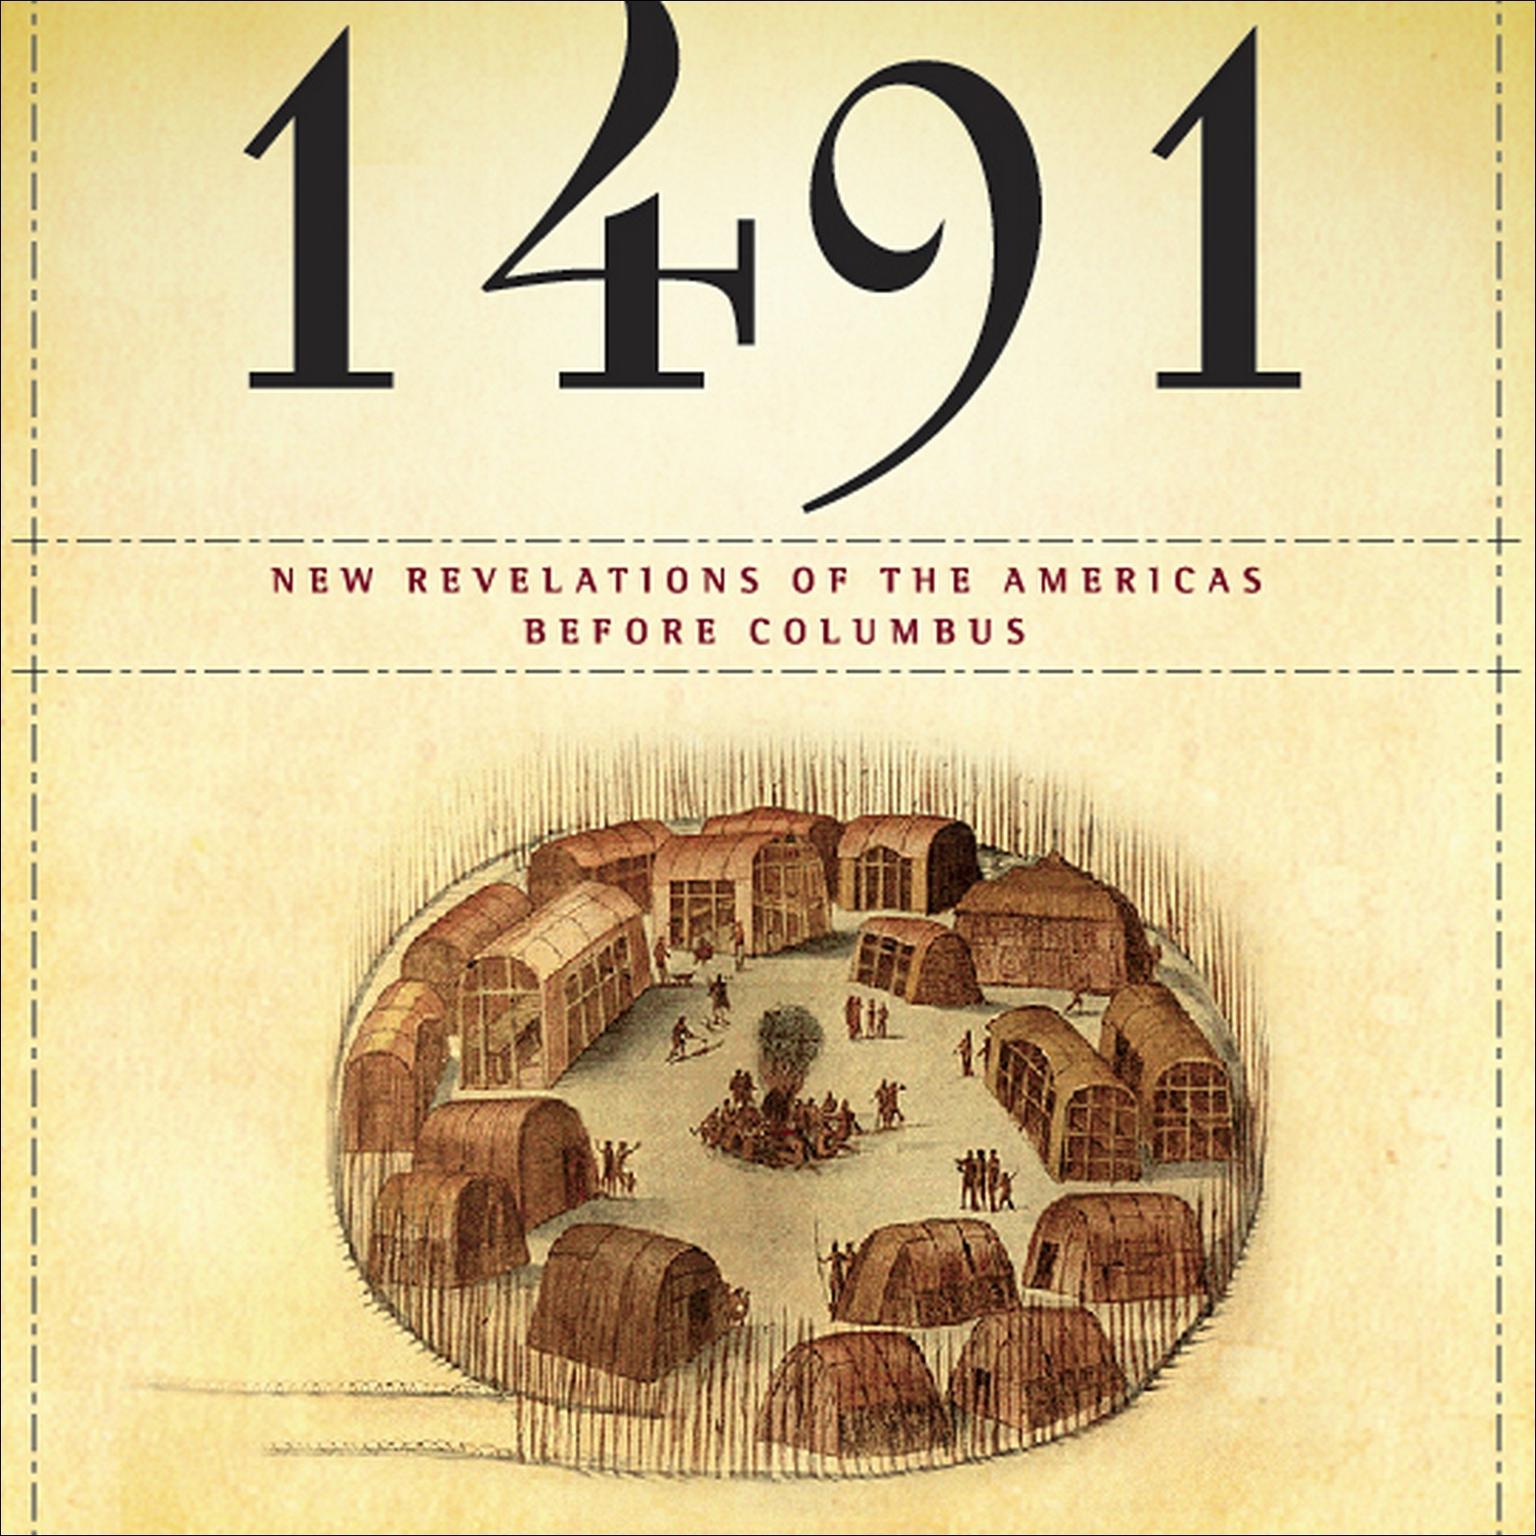 1491 (Abridged): New Revelations of the Americas Before Columbus Audiobook, by Charles C. Mann